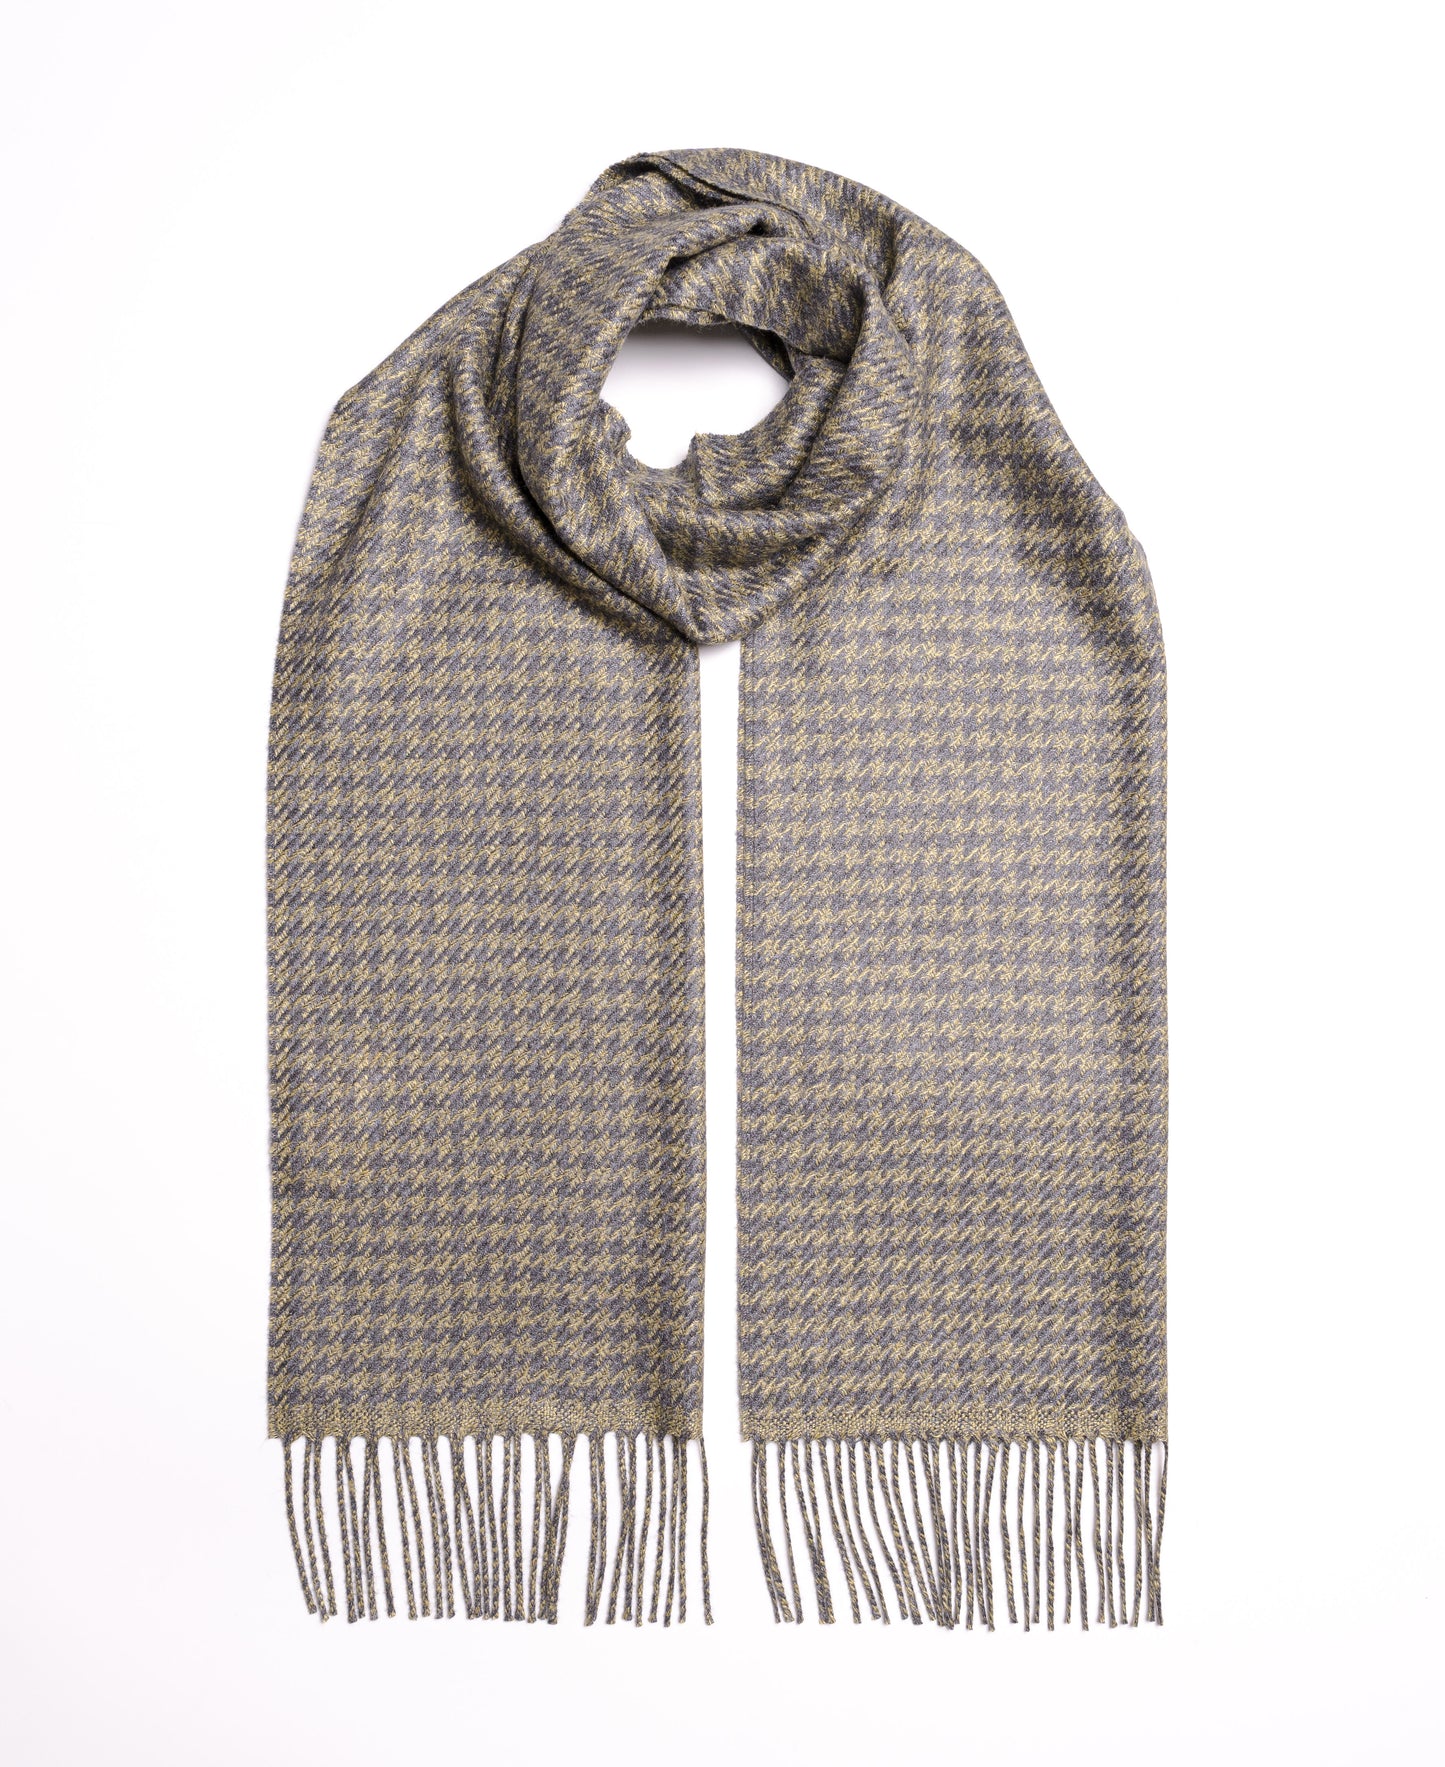 Twist houndstooth yellow and gray scarf in Cashmere Silk